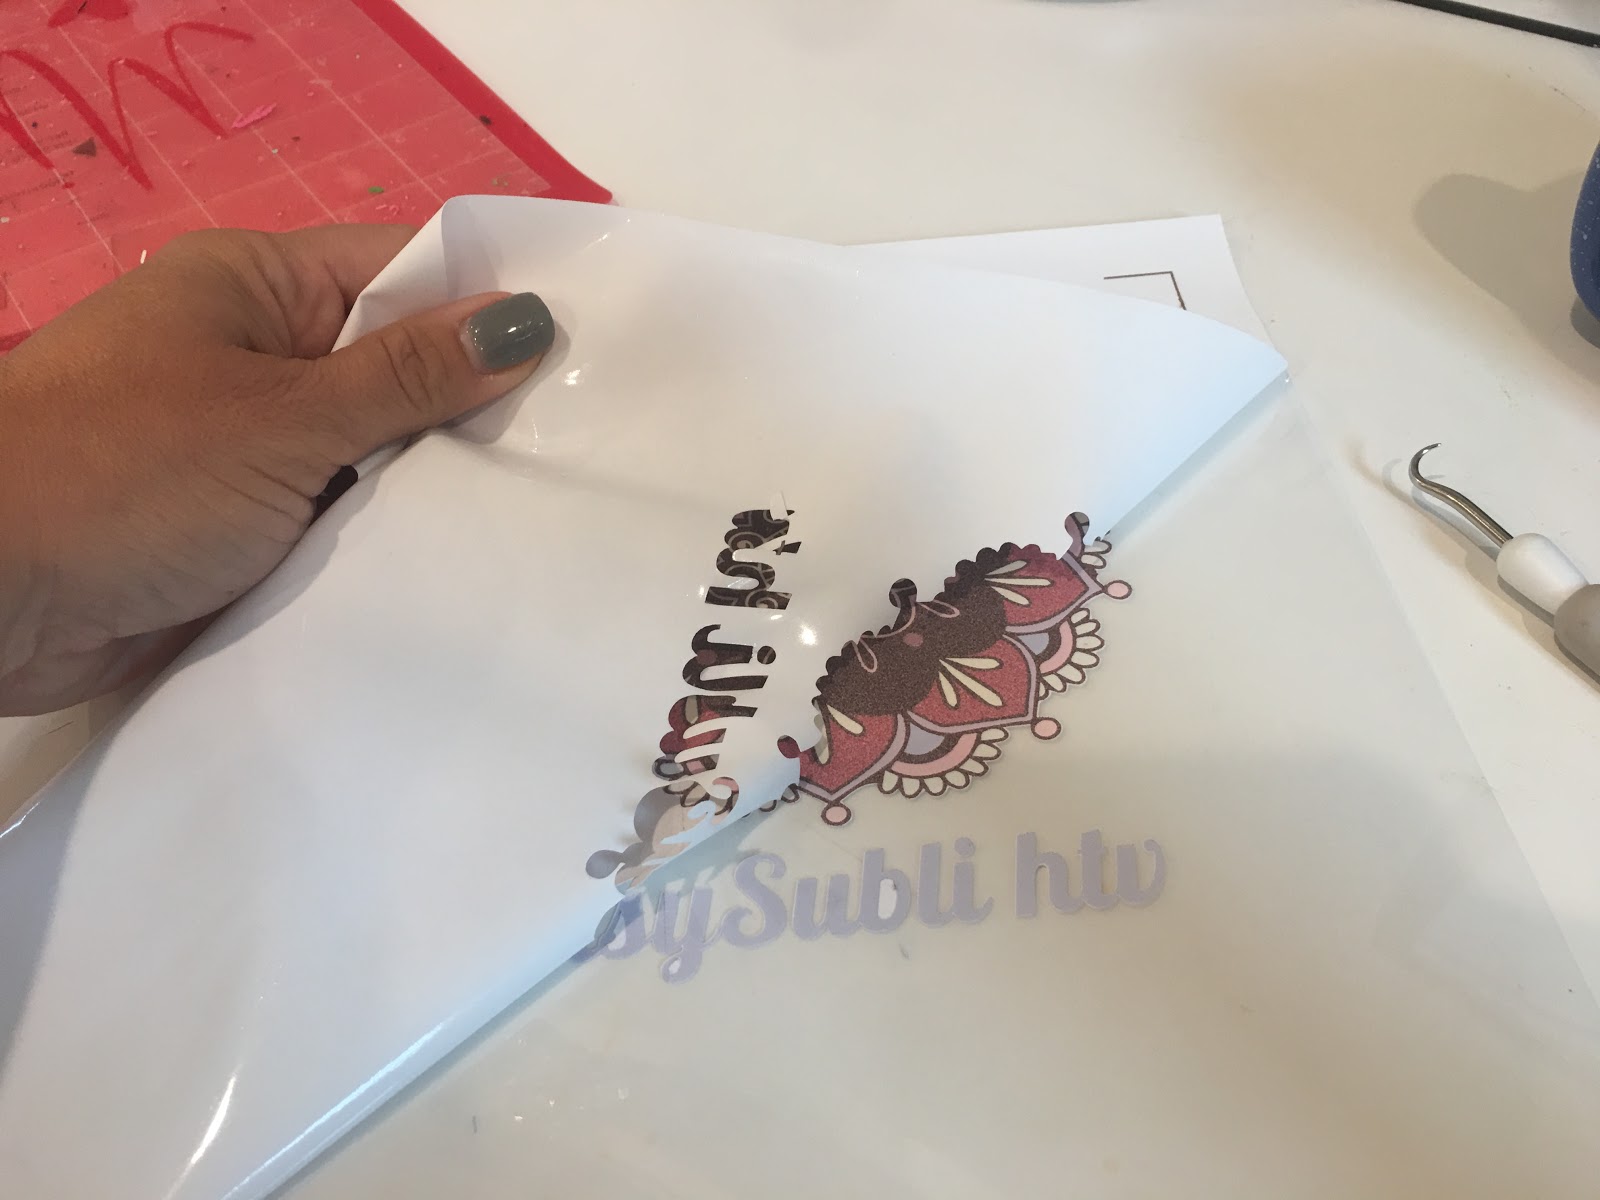 Siser EasySubli HTV: Everything You Want to Know About Sublimation HTV! -  Silhouette School